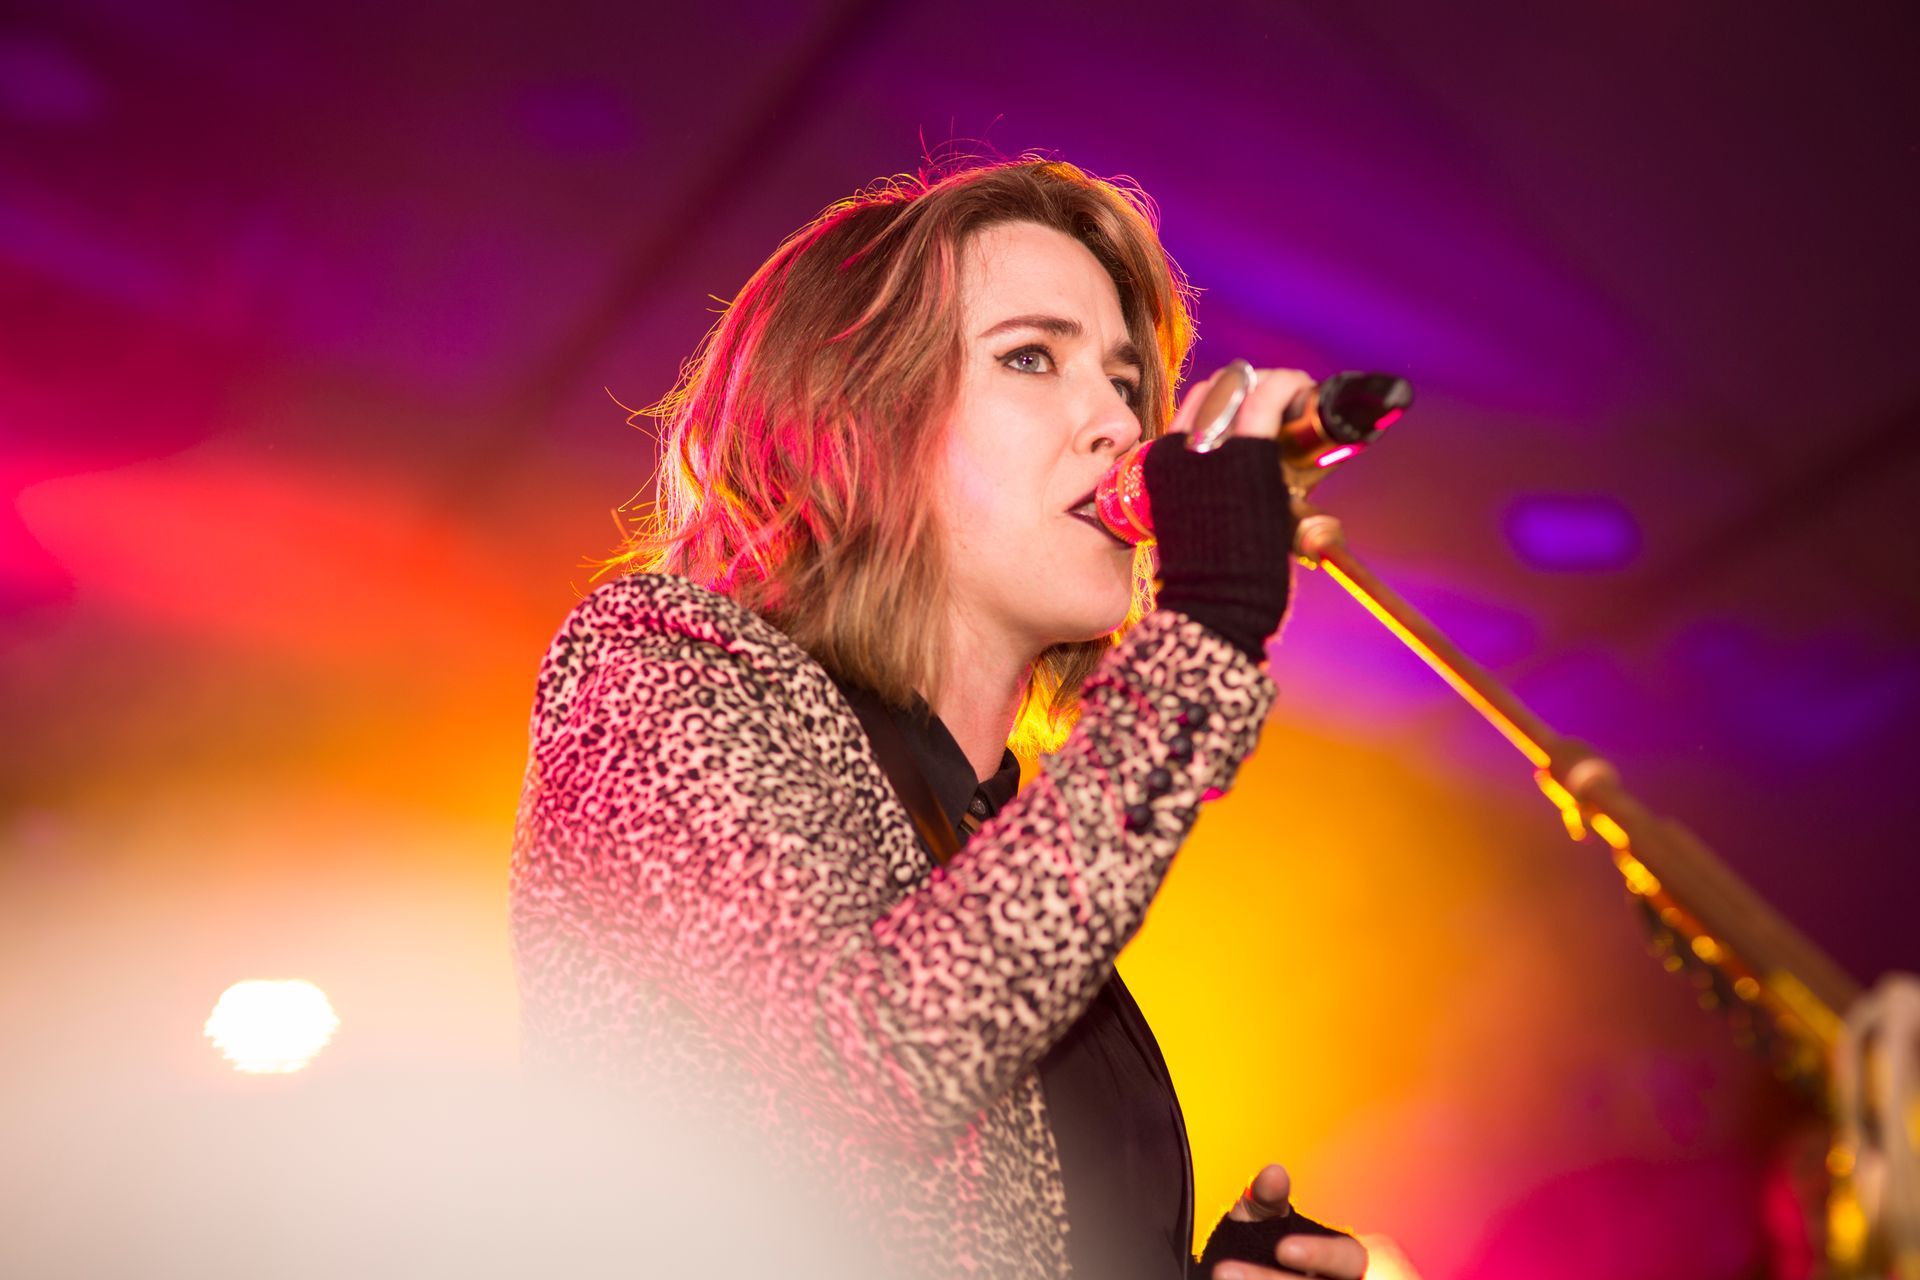 Serena Ryder performing at an event in Calgary, Alberta